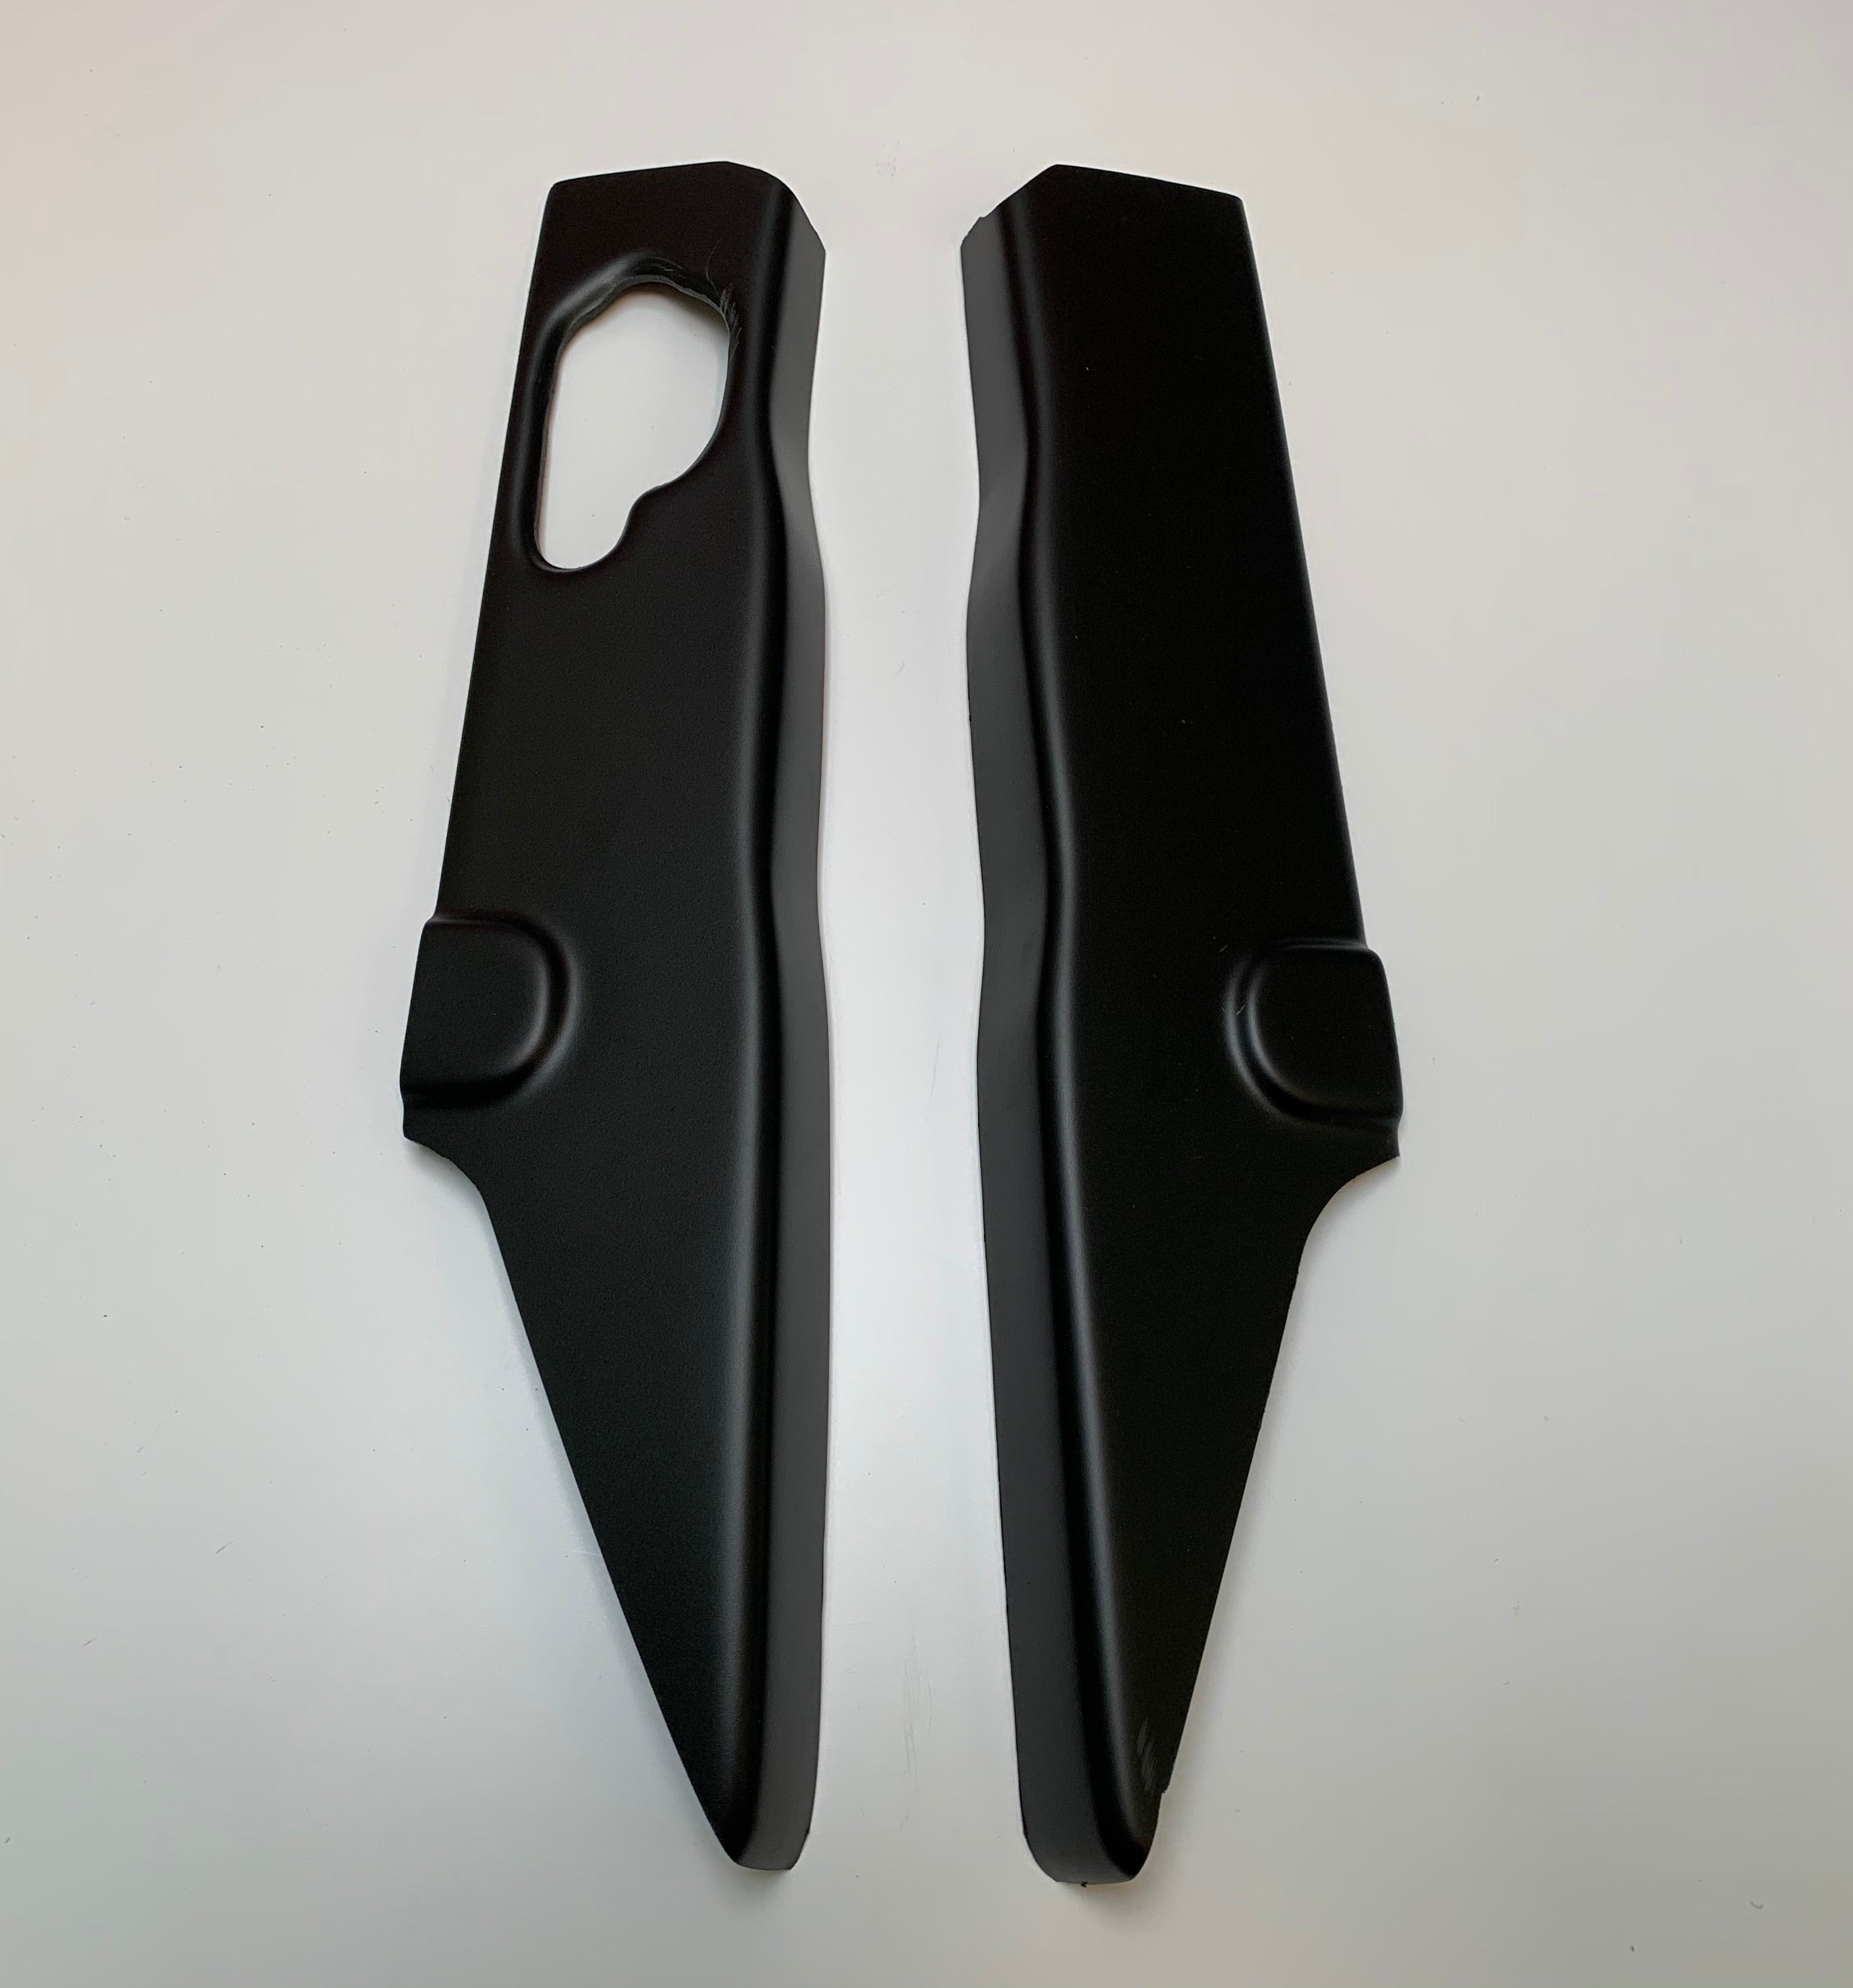 Proform Inner Wing Covers - Mk2/2.5 Ford Focus (Plastic Finishes)